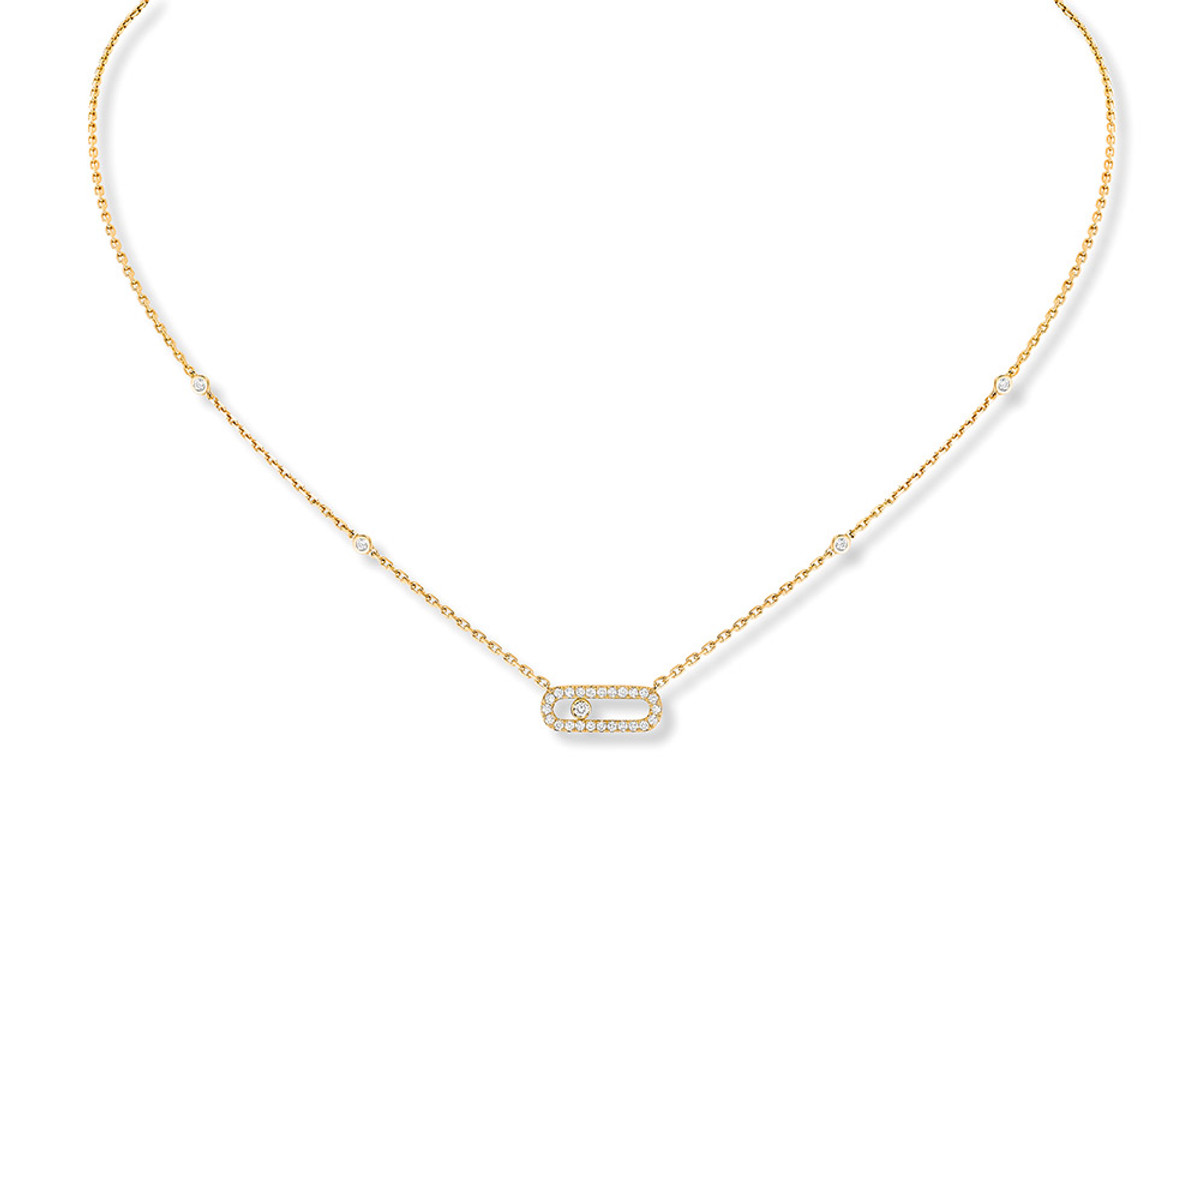 Messika Move Uno Pave Diamond Necklace-37058 Product Image